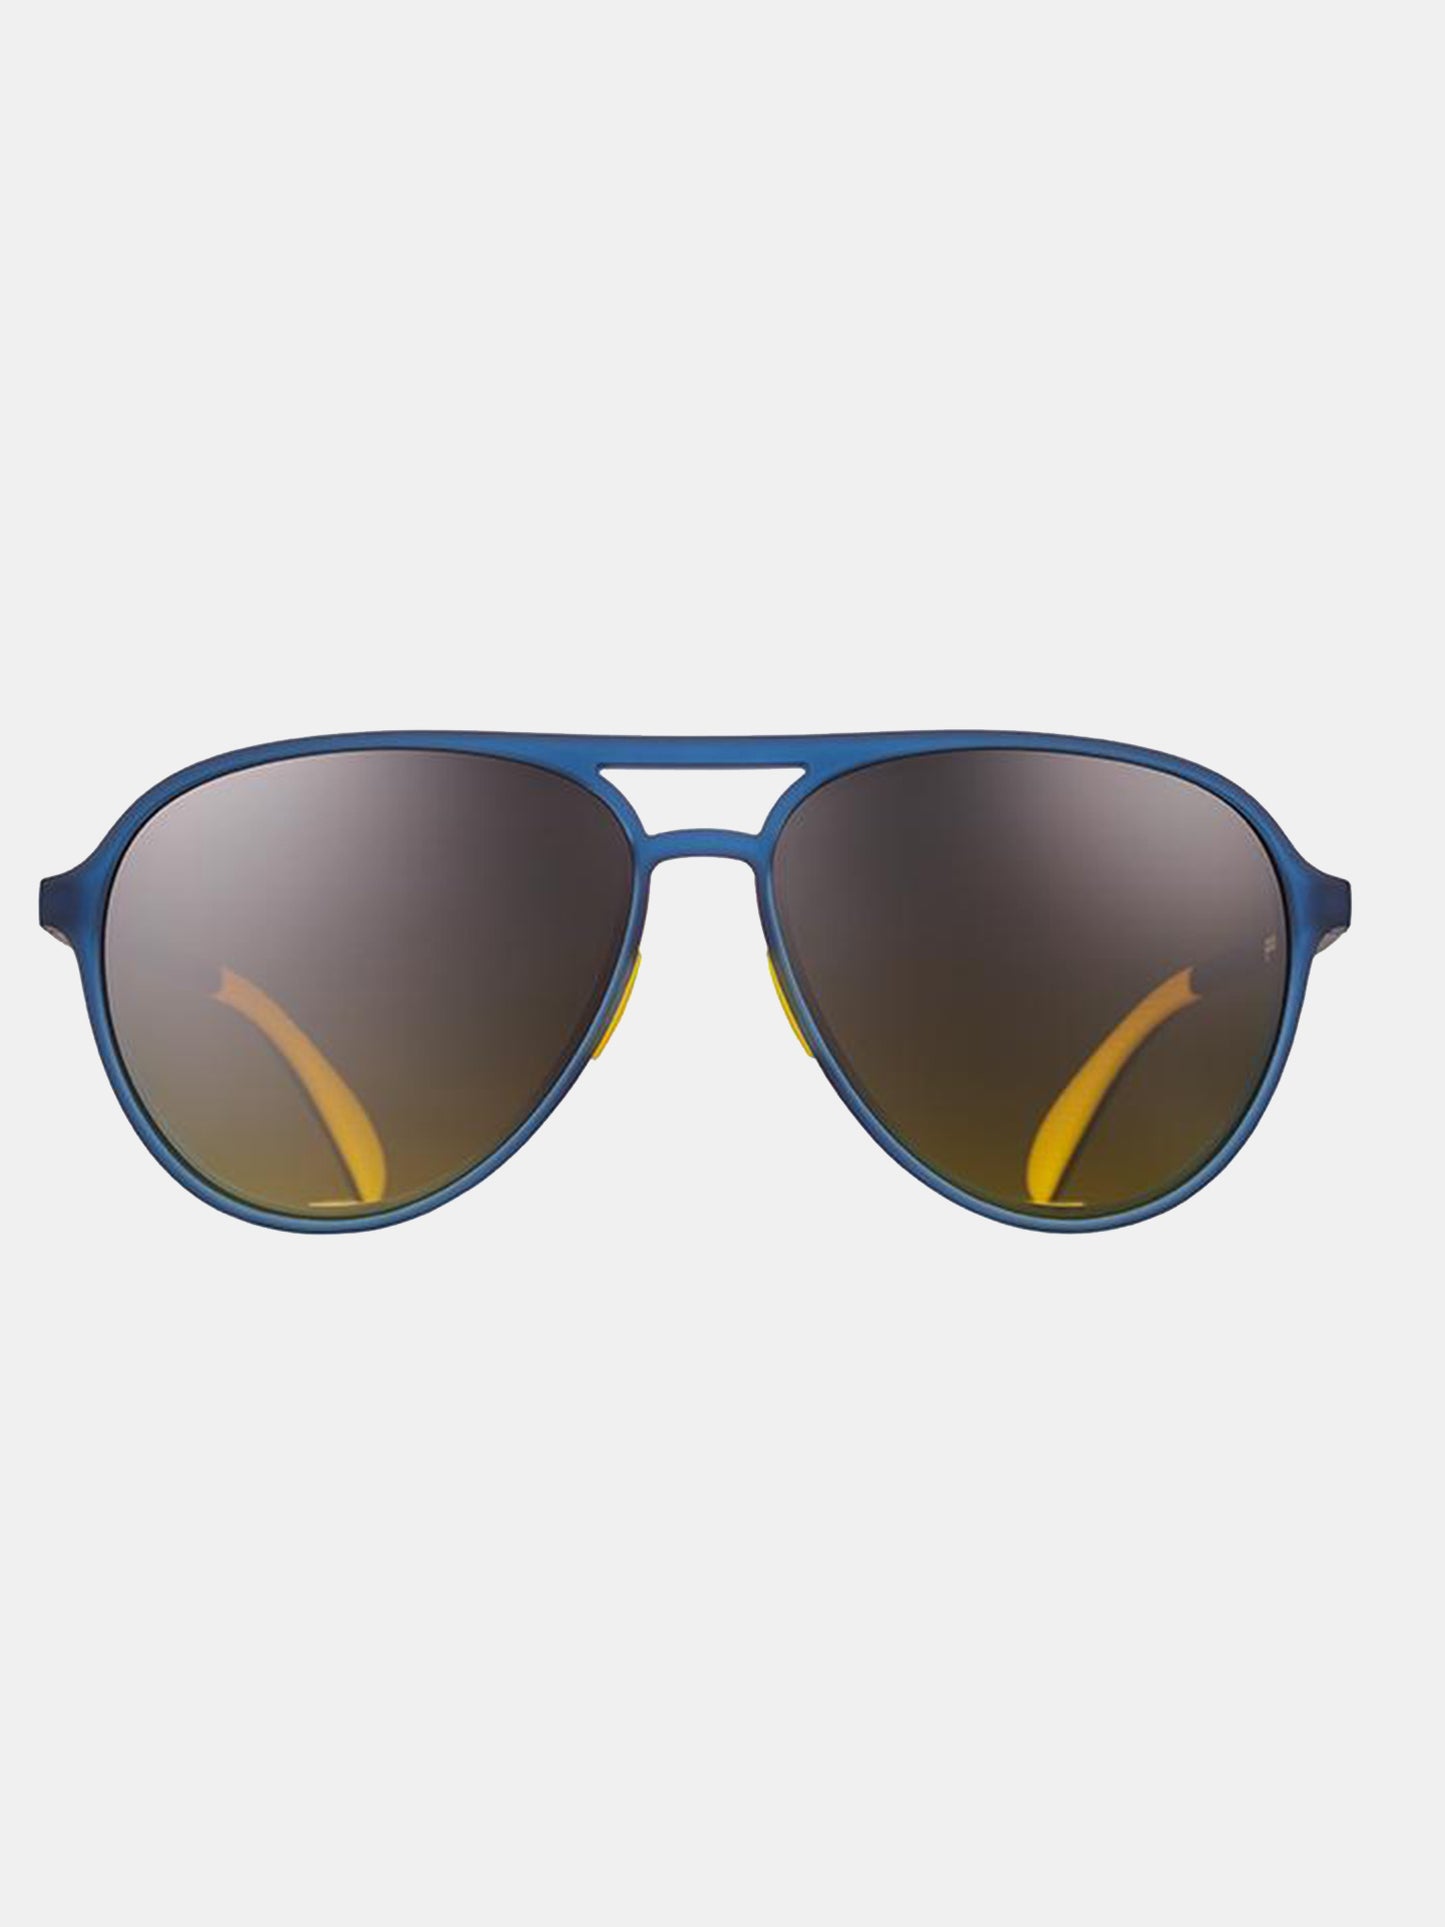 Goodr Frequent Skymall Shoppers Sunglasses